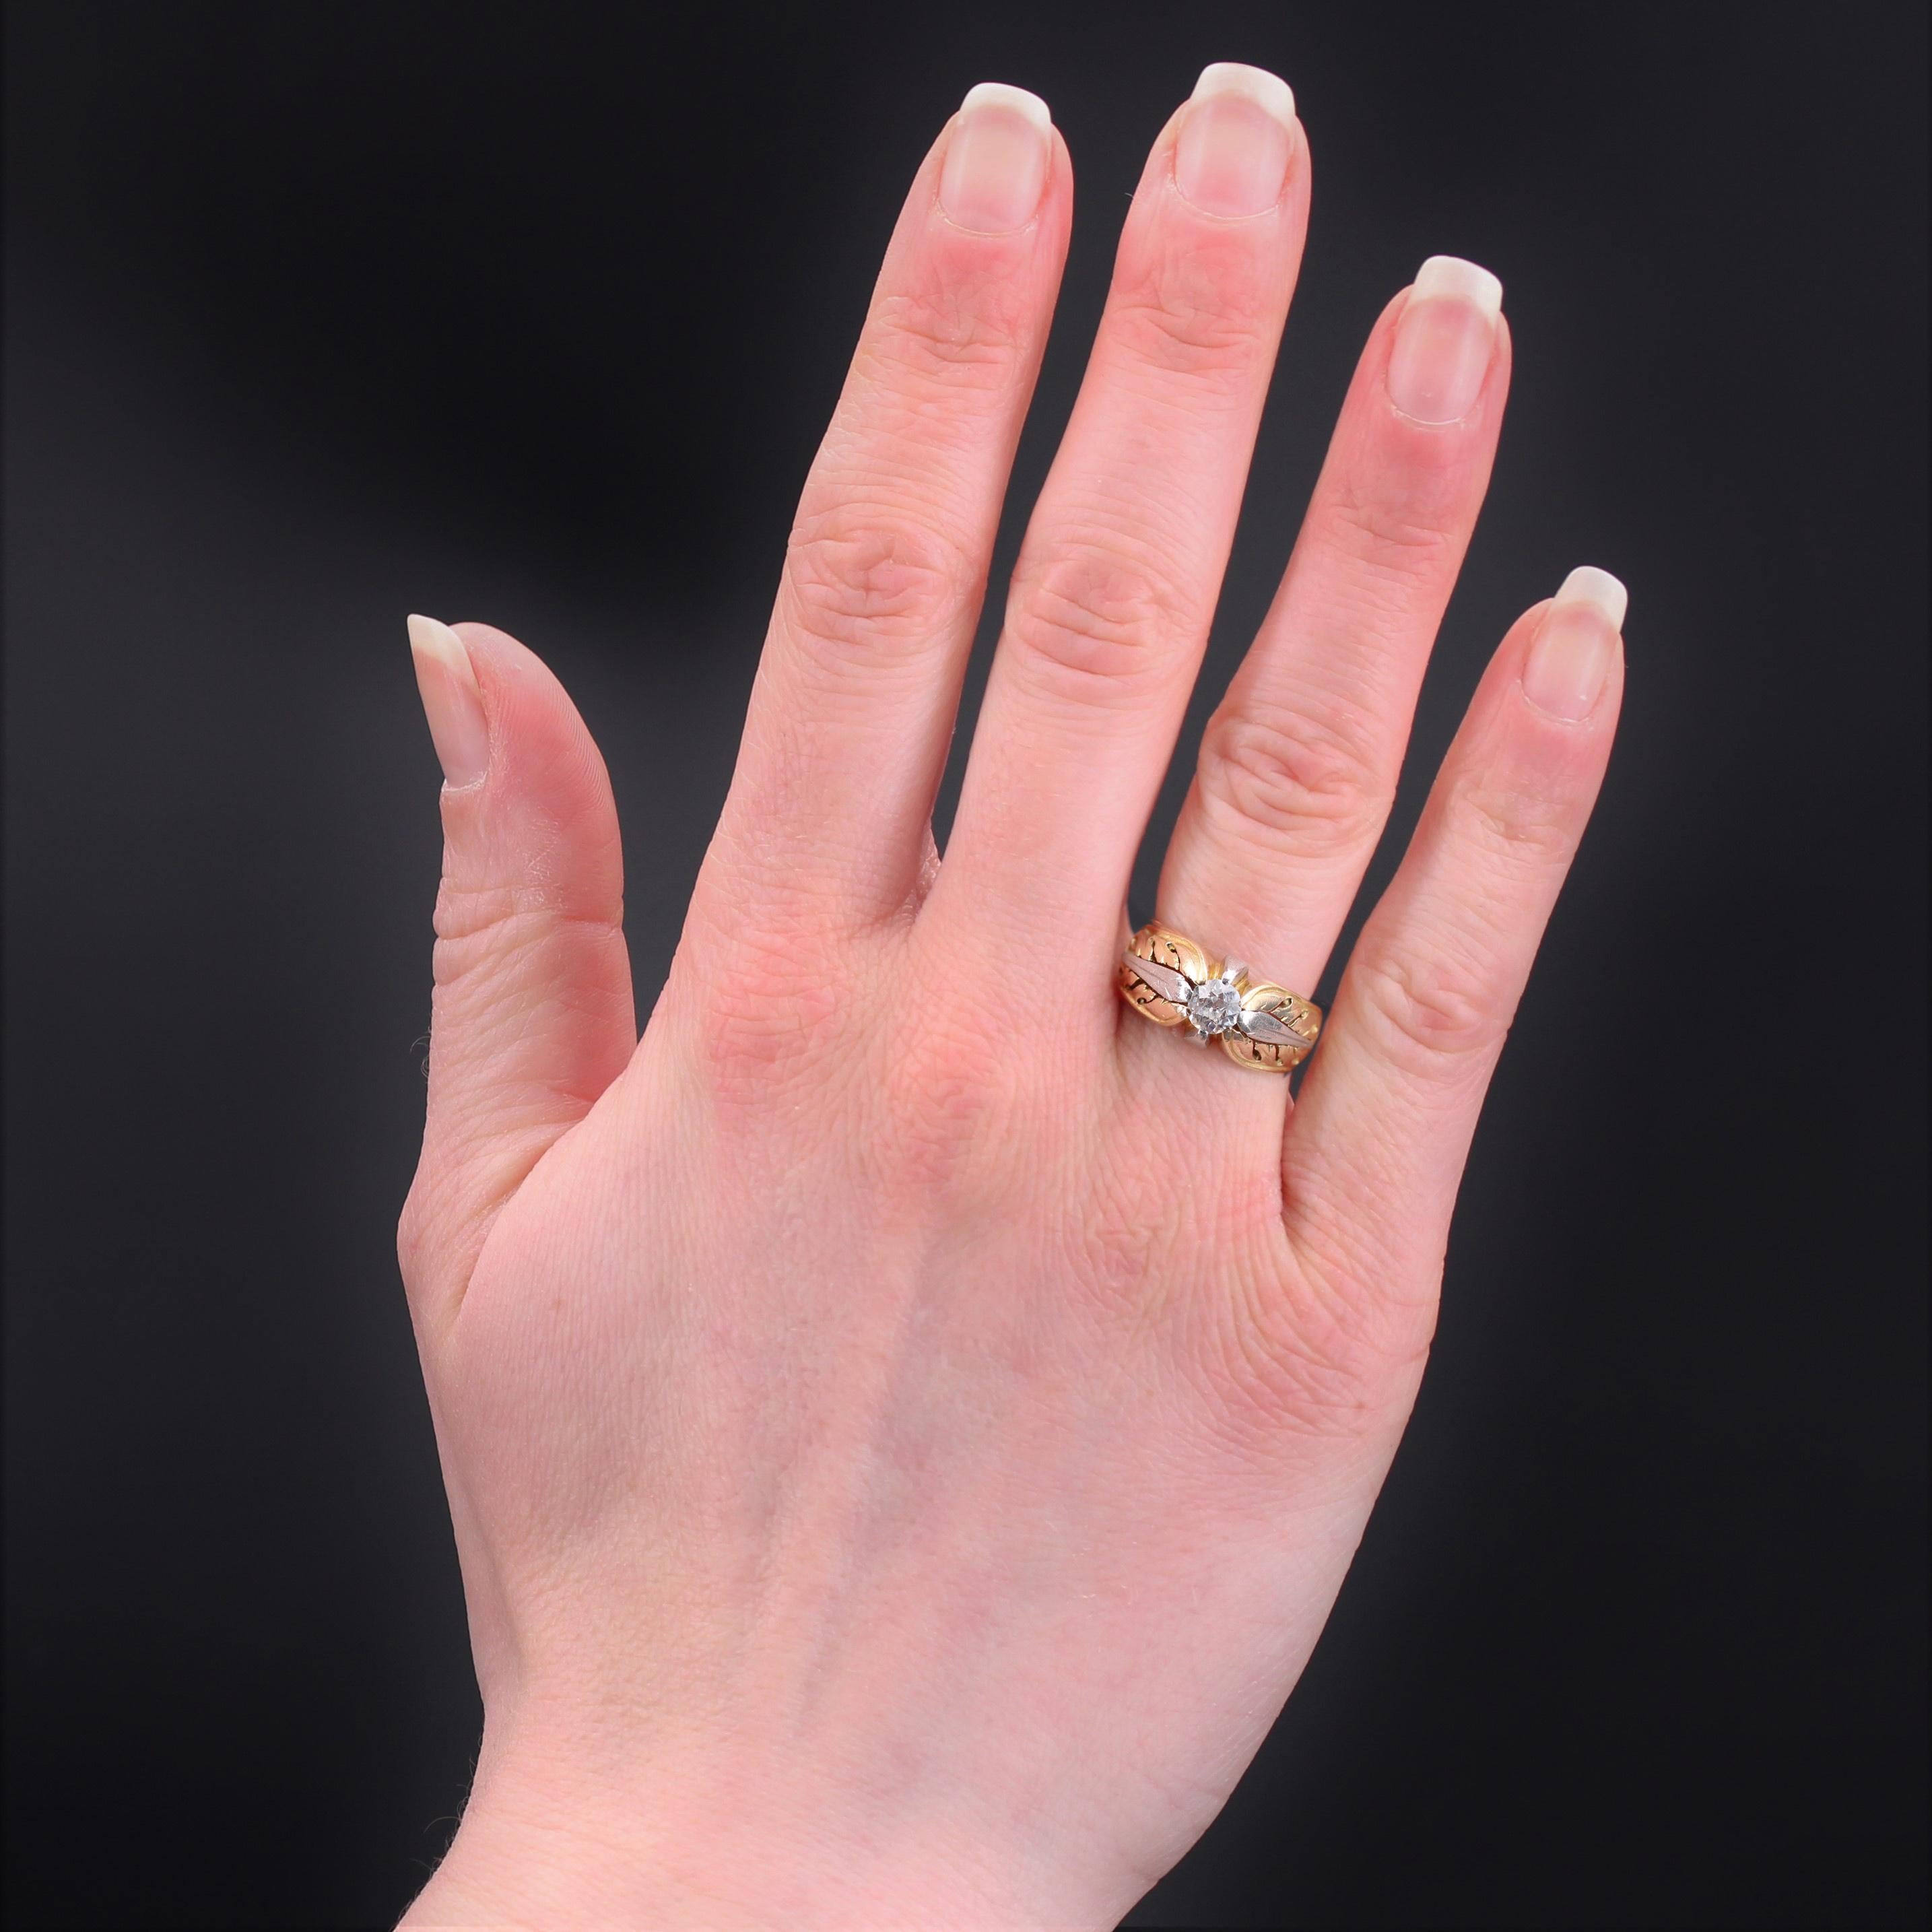 Ring in 18 karat yellow gold and platinum.
Charming antique ring, the upper part of the ring is openworked, engraved and decorated with a platinum leaf on both sides, and in its center. A brilliant-cut diamond is held by these patterns and by 2